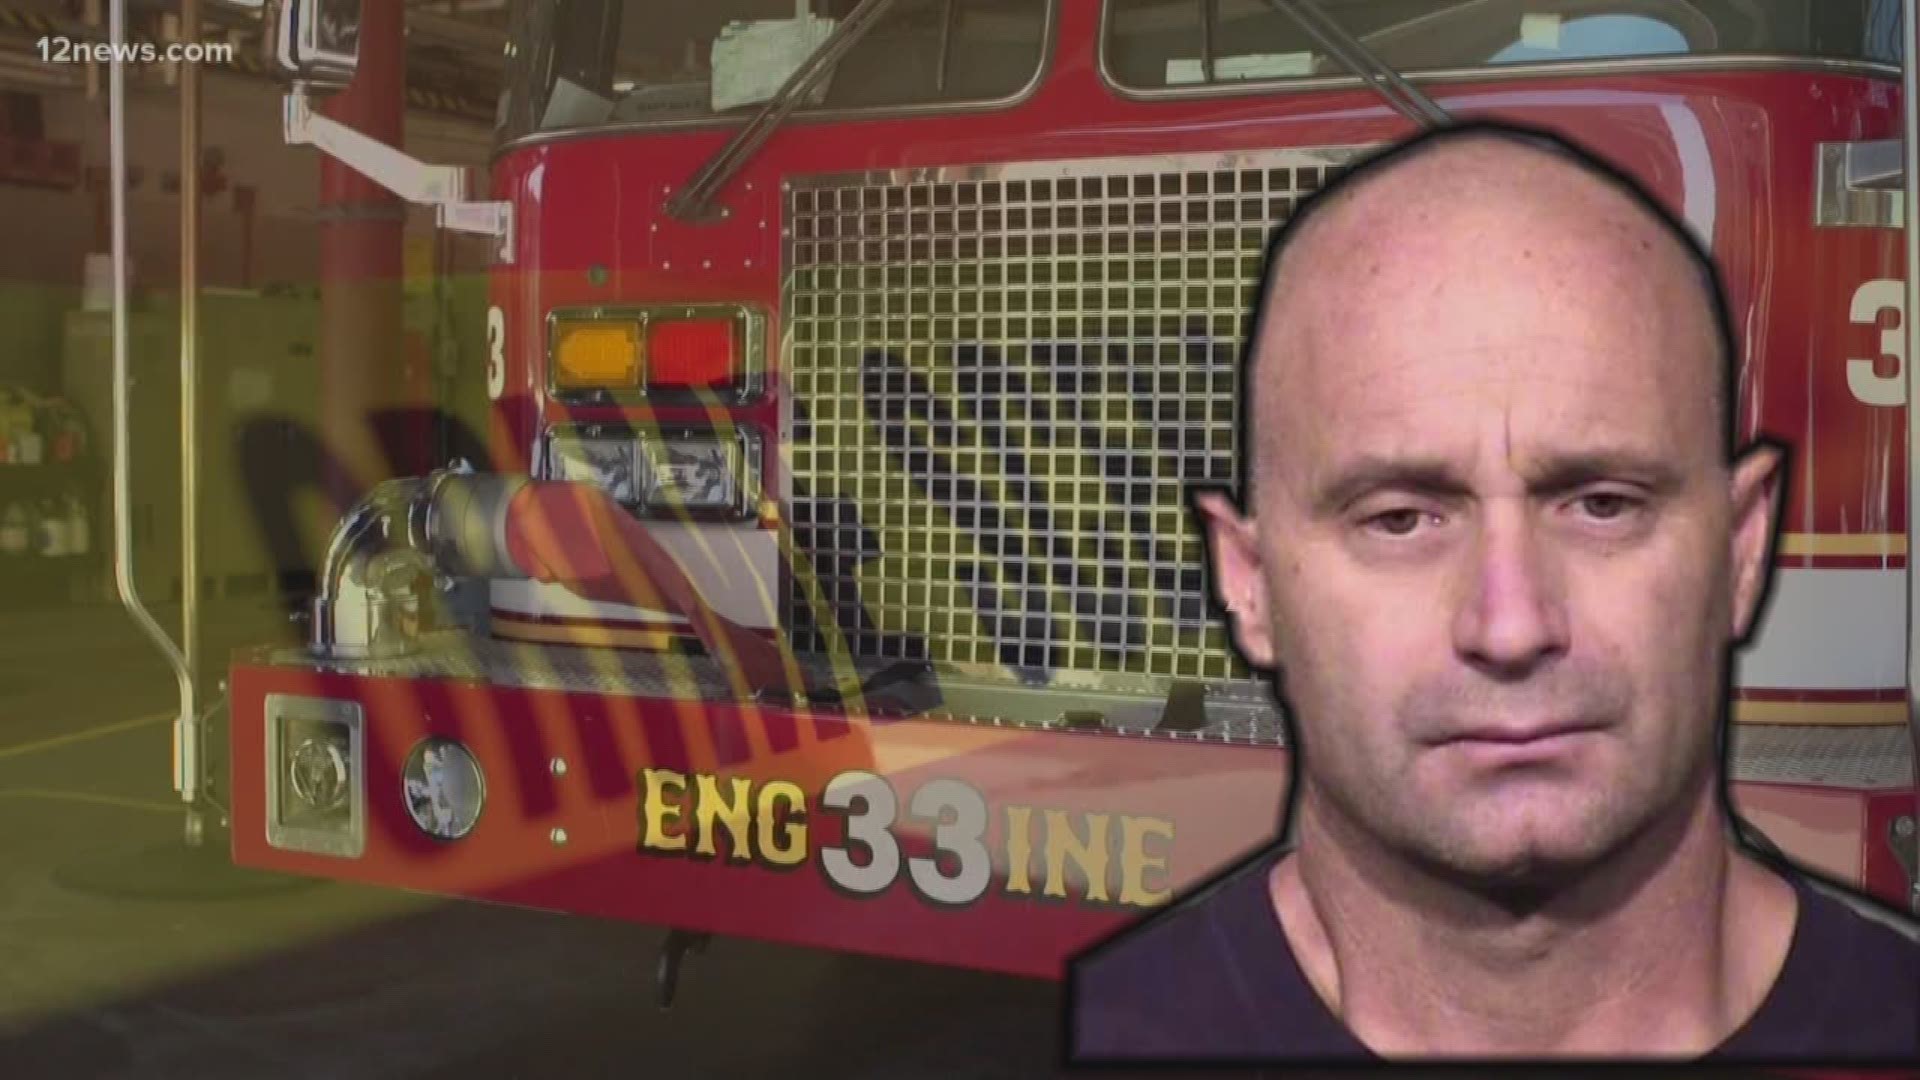 A captain with Gilbert Fire and Rescue was arrested and is facing charges of sexual conduct with a minor, the Maricopa County Sheriff's Office said Wednesday.